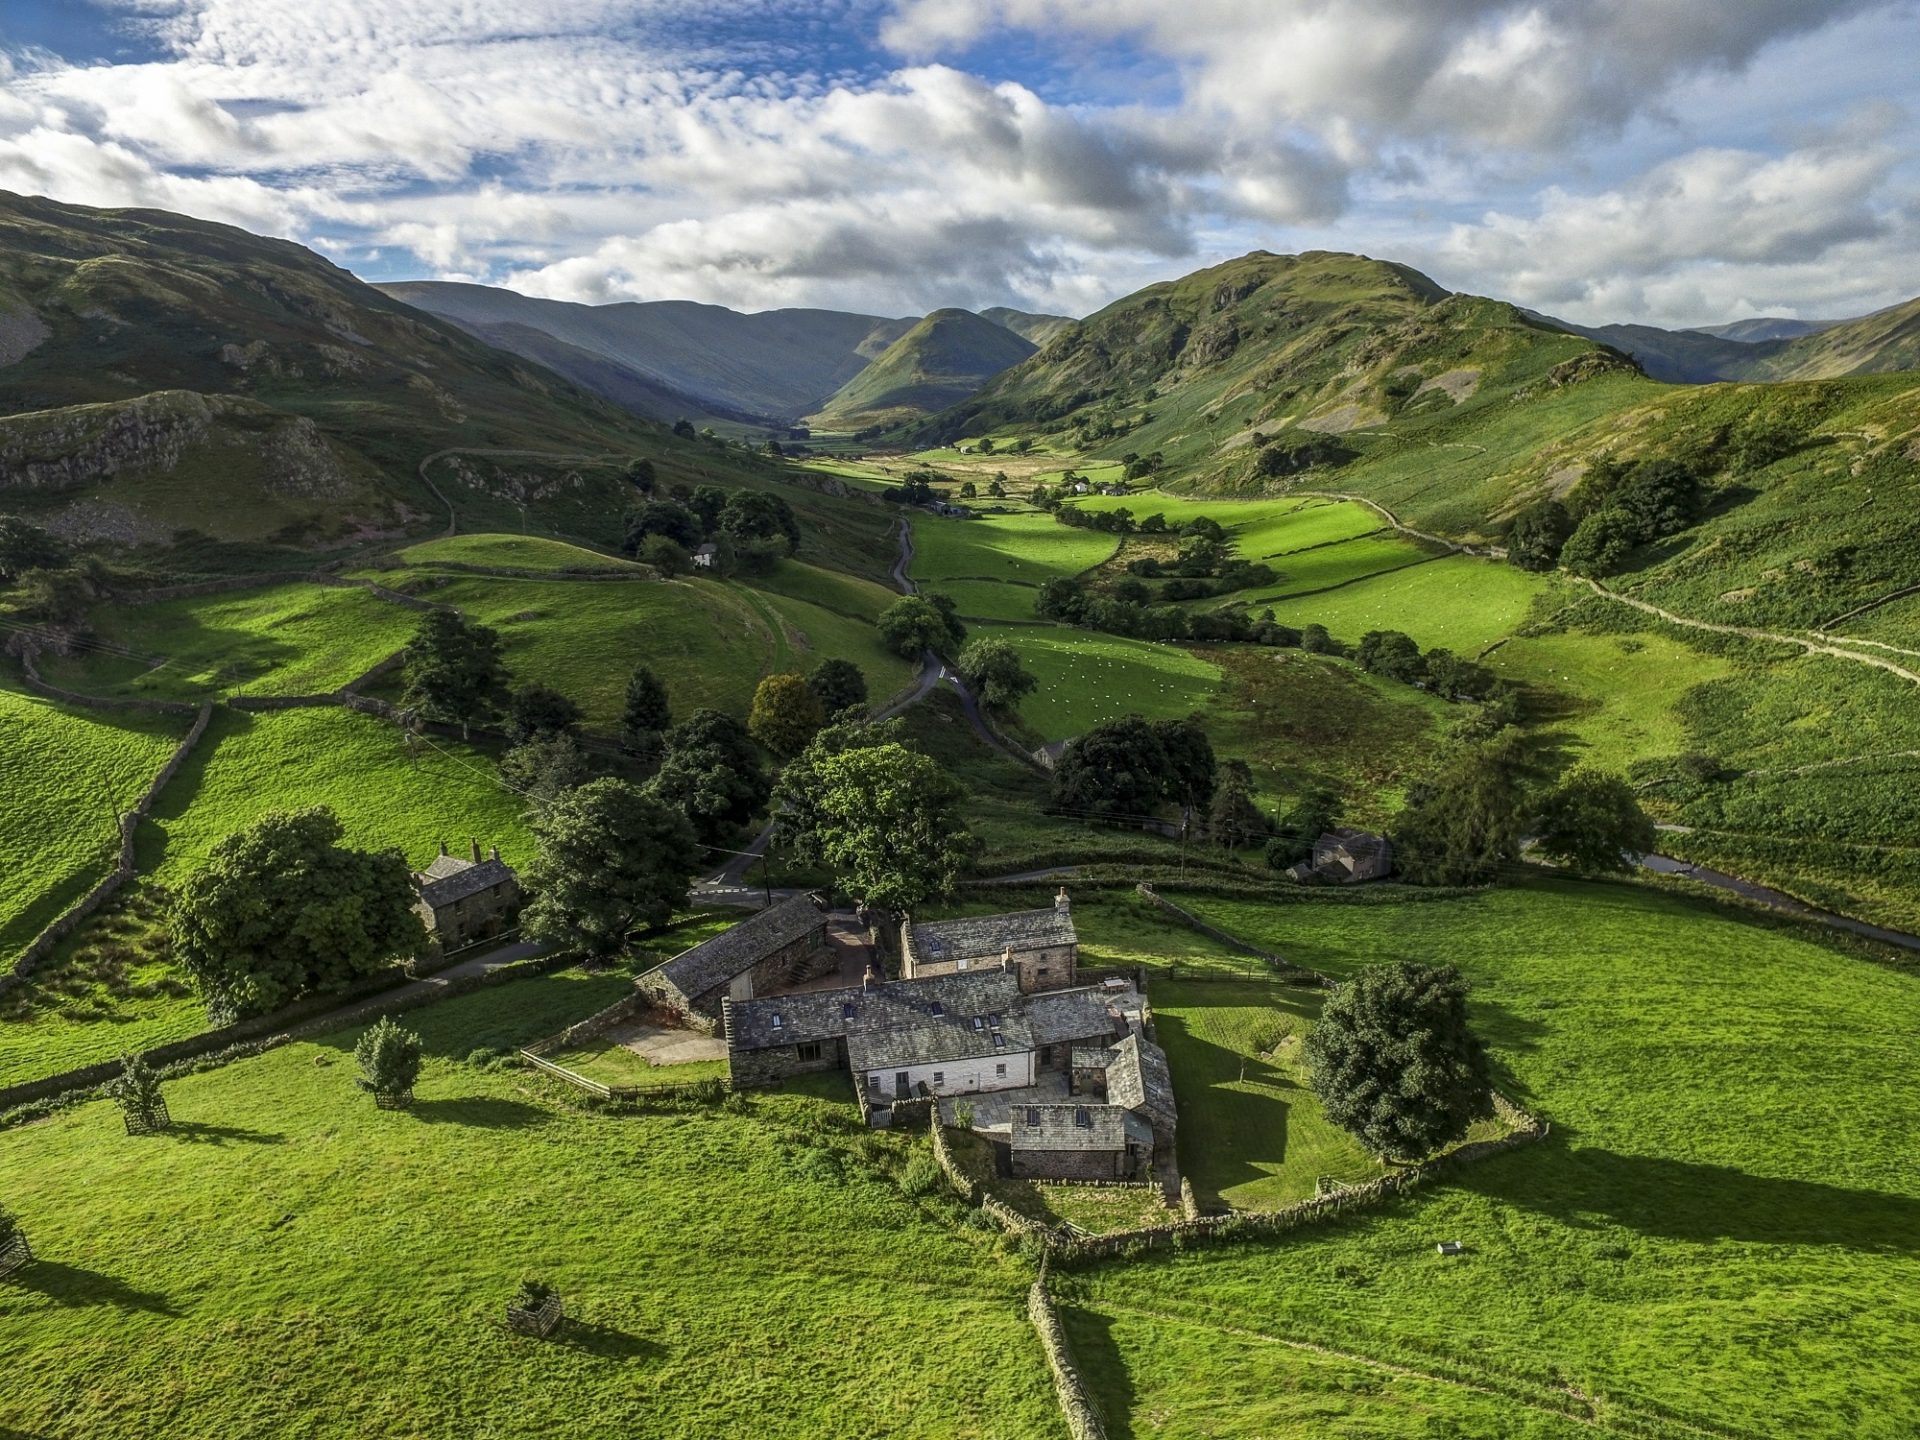 Hause Hall Farm luxury holiday cottage in Lake District near Ullswater